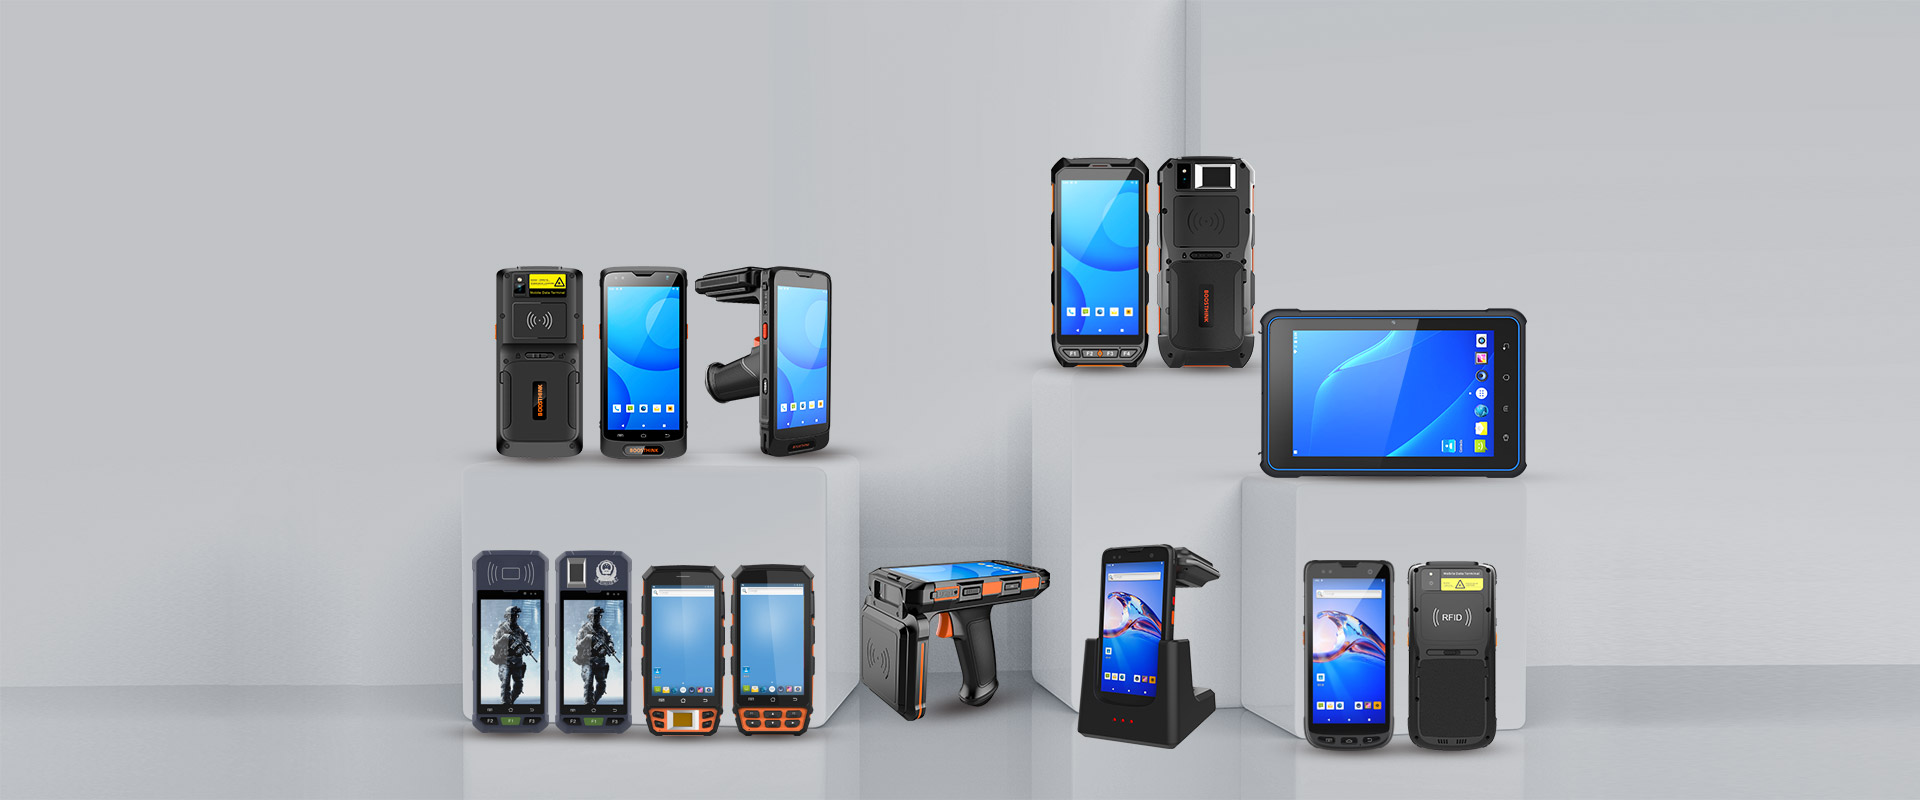 Shenzhen Handheld-Wireless Technology Co.,Ltd.,offer various andoid RFID or barcode readers for a variety of applications and uses.